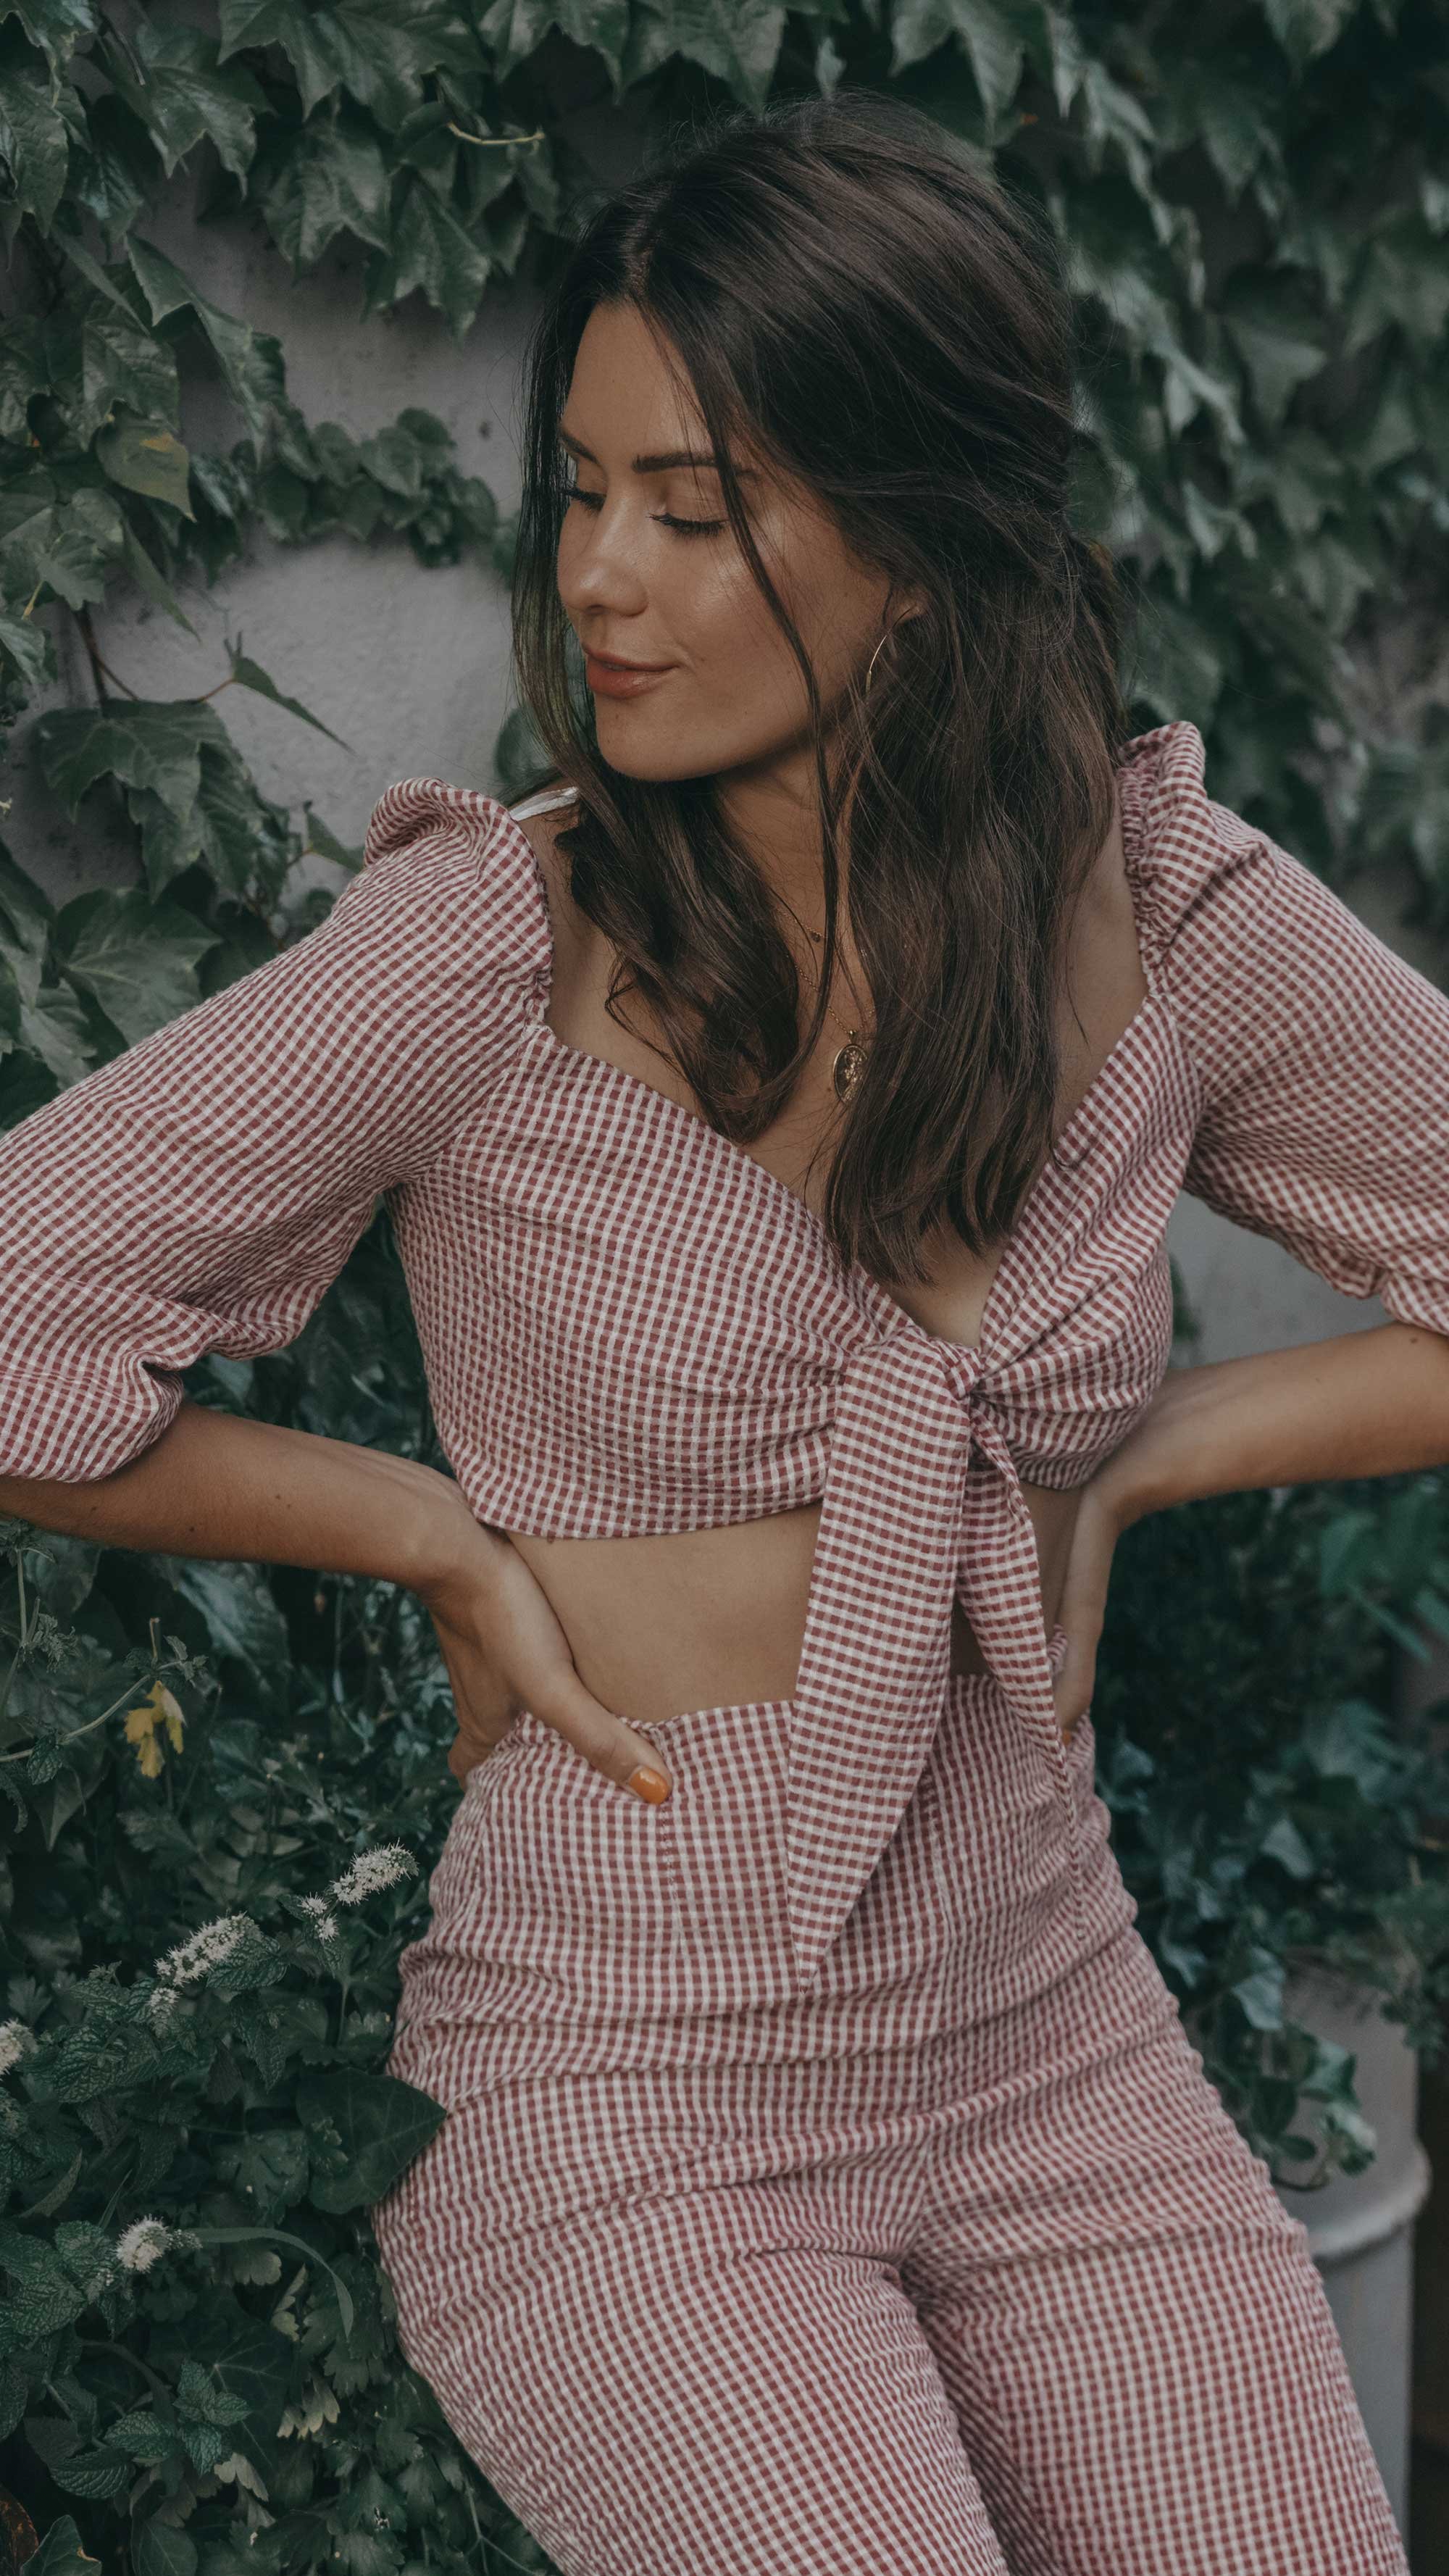 Gingham Summer Outfit. Sarah Butler of @sarahchristine wearing gingham crop top and pants coordinating set for a chic summer look -1.jpg